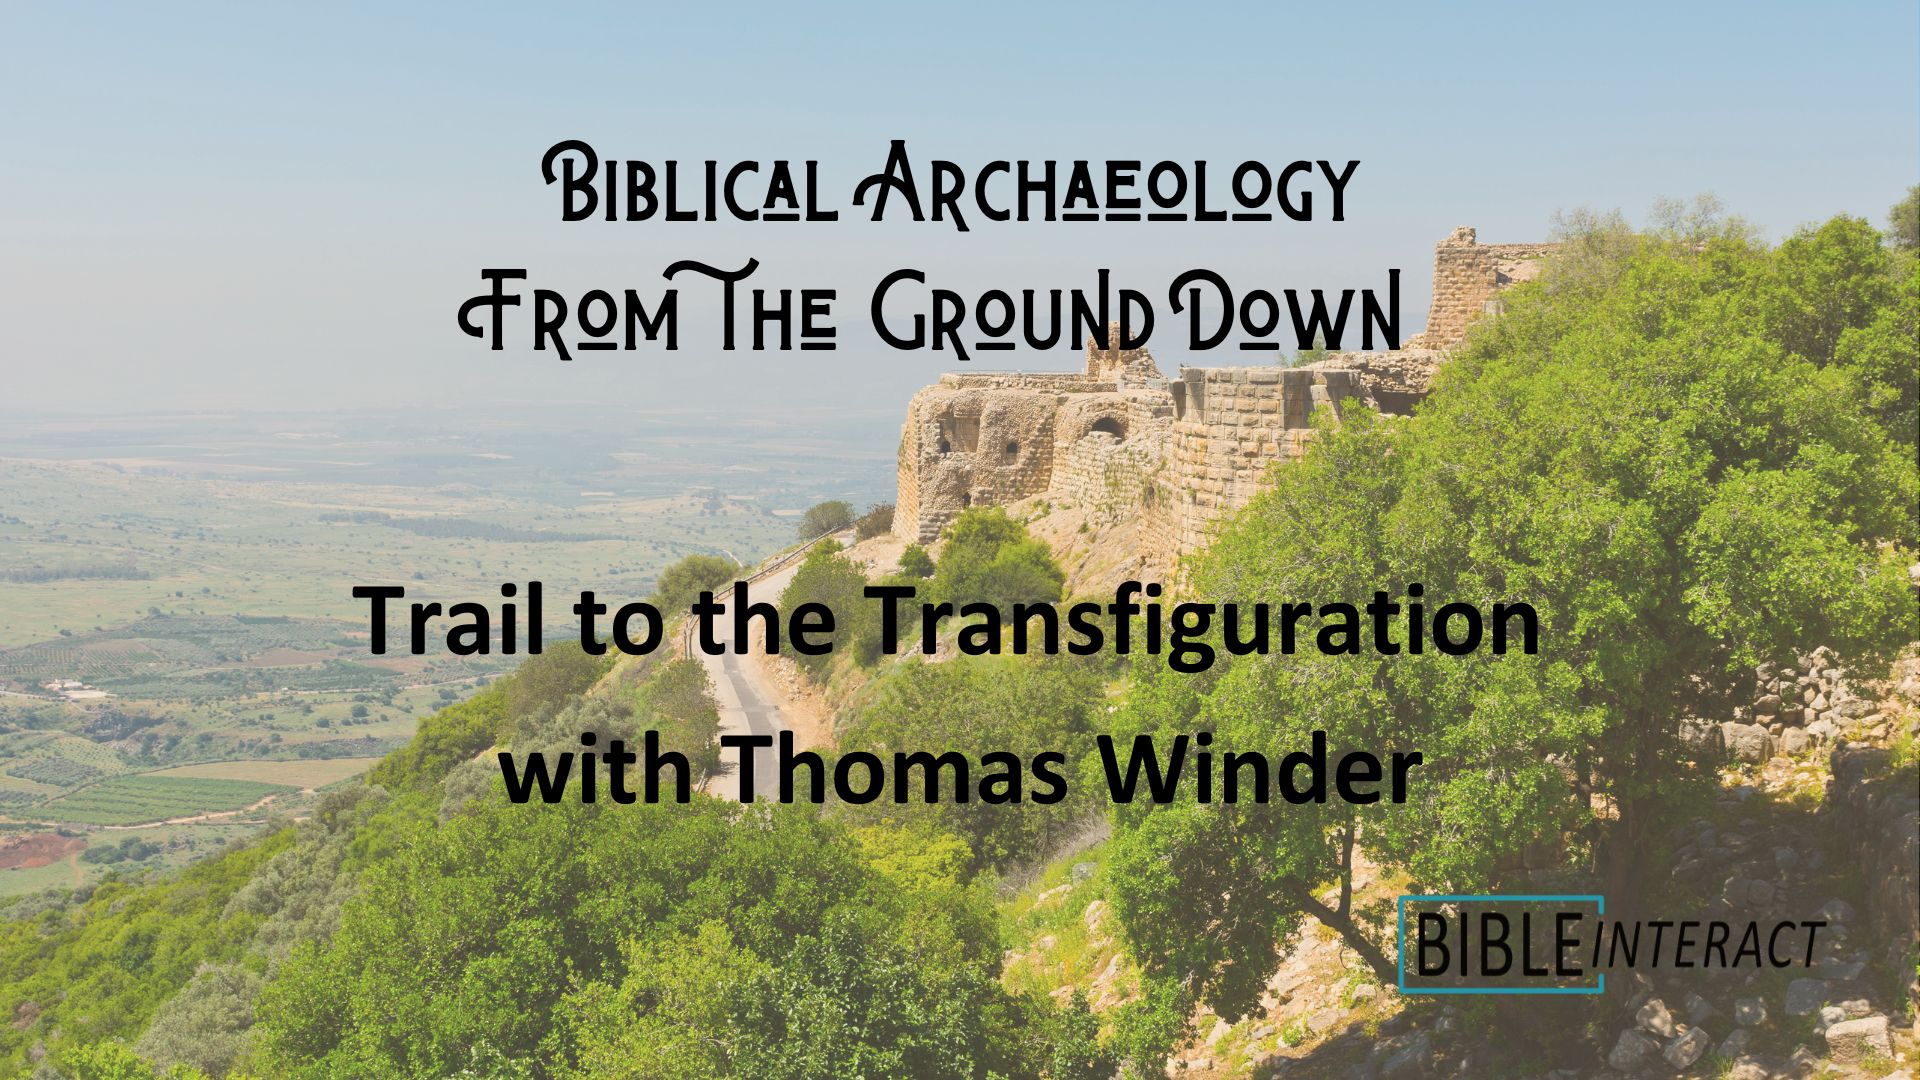 ▶️ Biblical Archaeology From the Ground Down: Trail to the Transfiguration with Thomas Winder